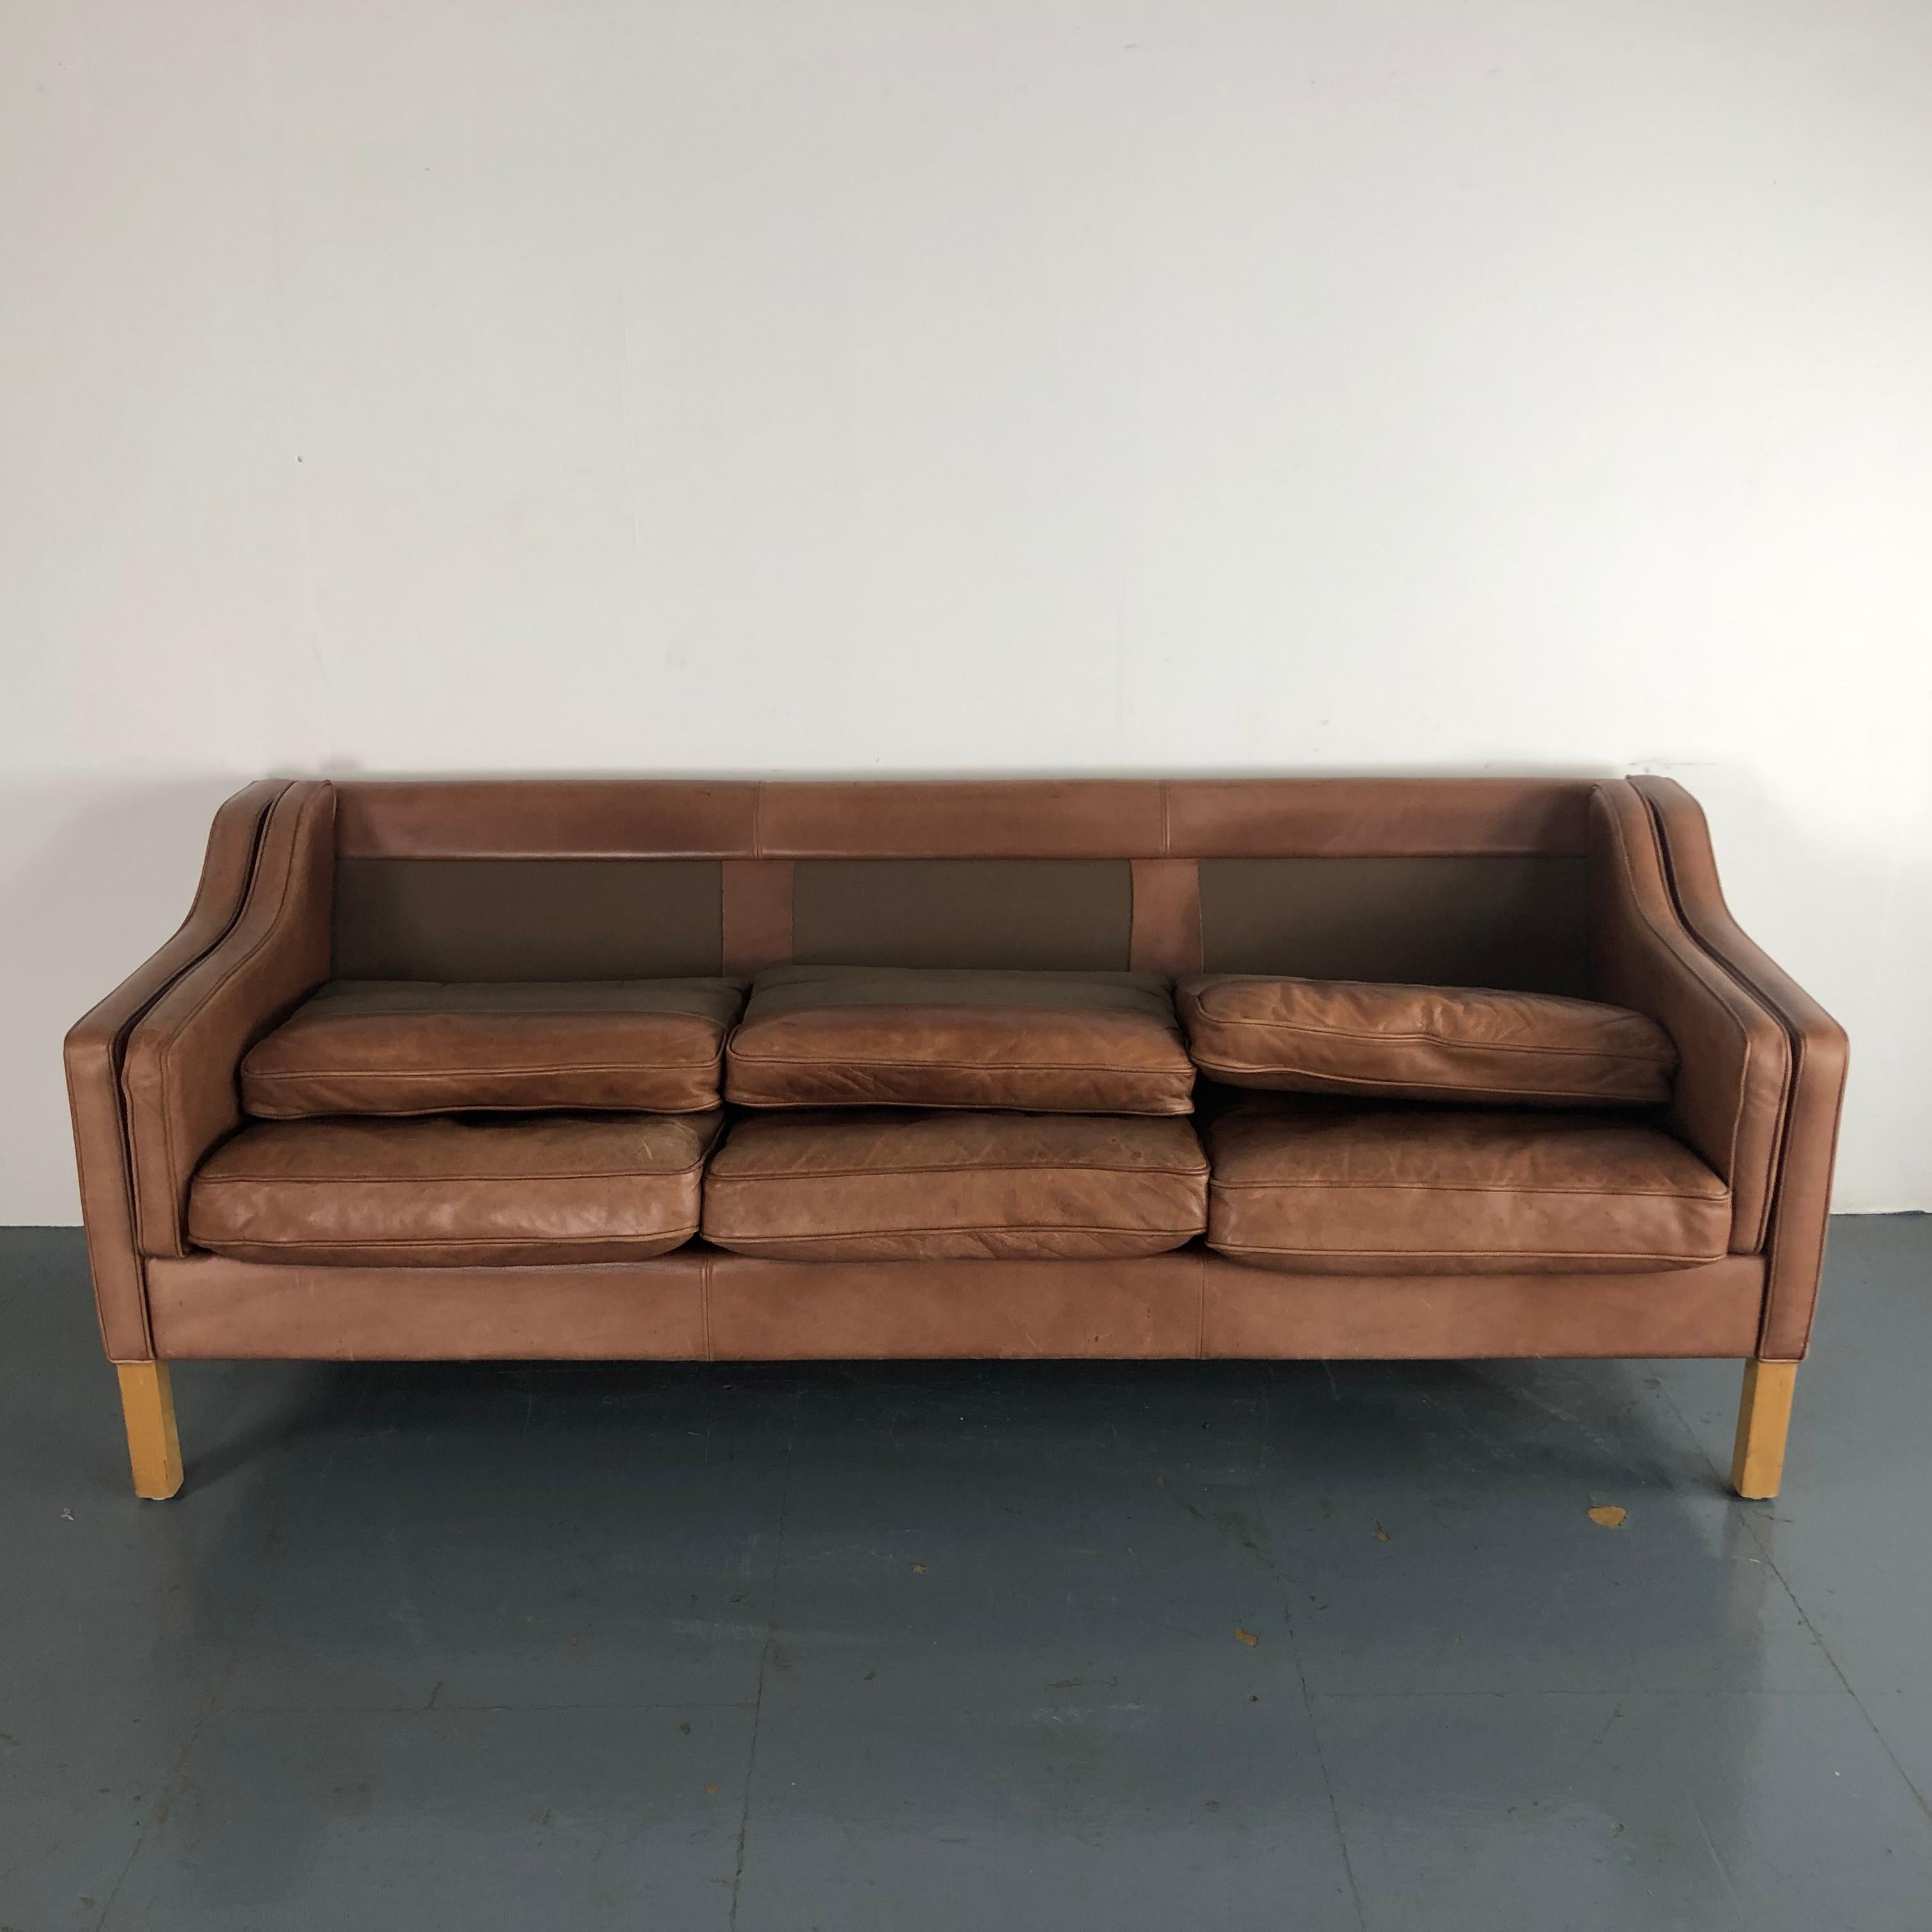 Gorgeous brown leather Mogensen style 1970s 3-seat Danish sofa.

Detachable seat cushions. Wooden legs.

Approx dimensions:

Width 210cm

Height 76cm

Depth 79cm

Seat height 49cm.

In good vintage condition; some age-related wear,